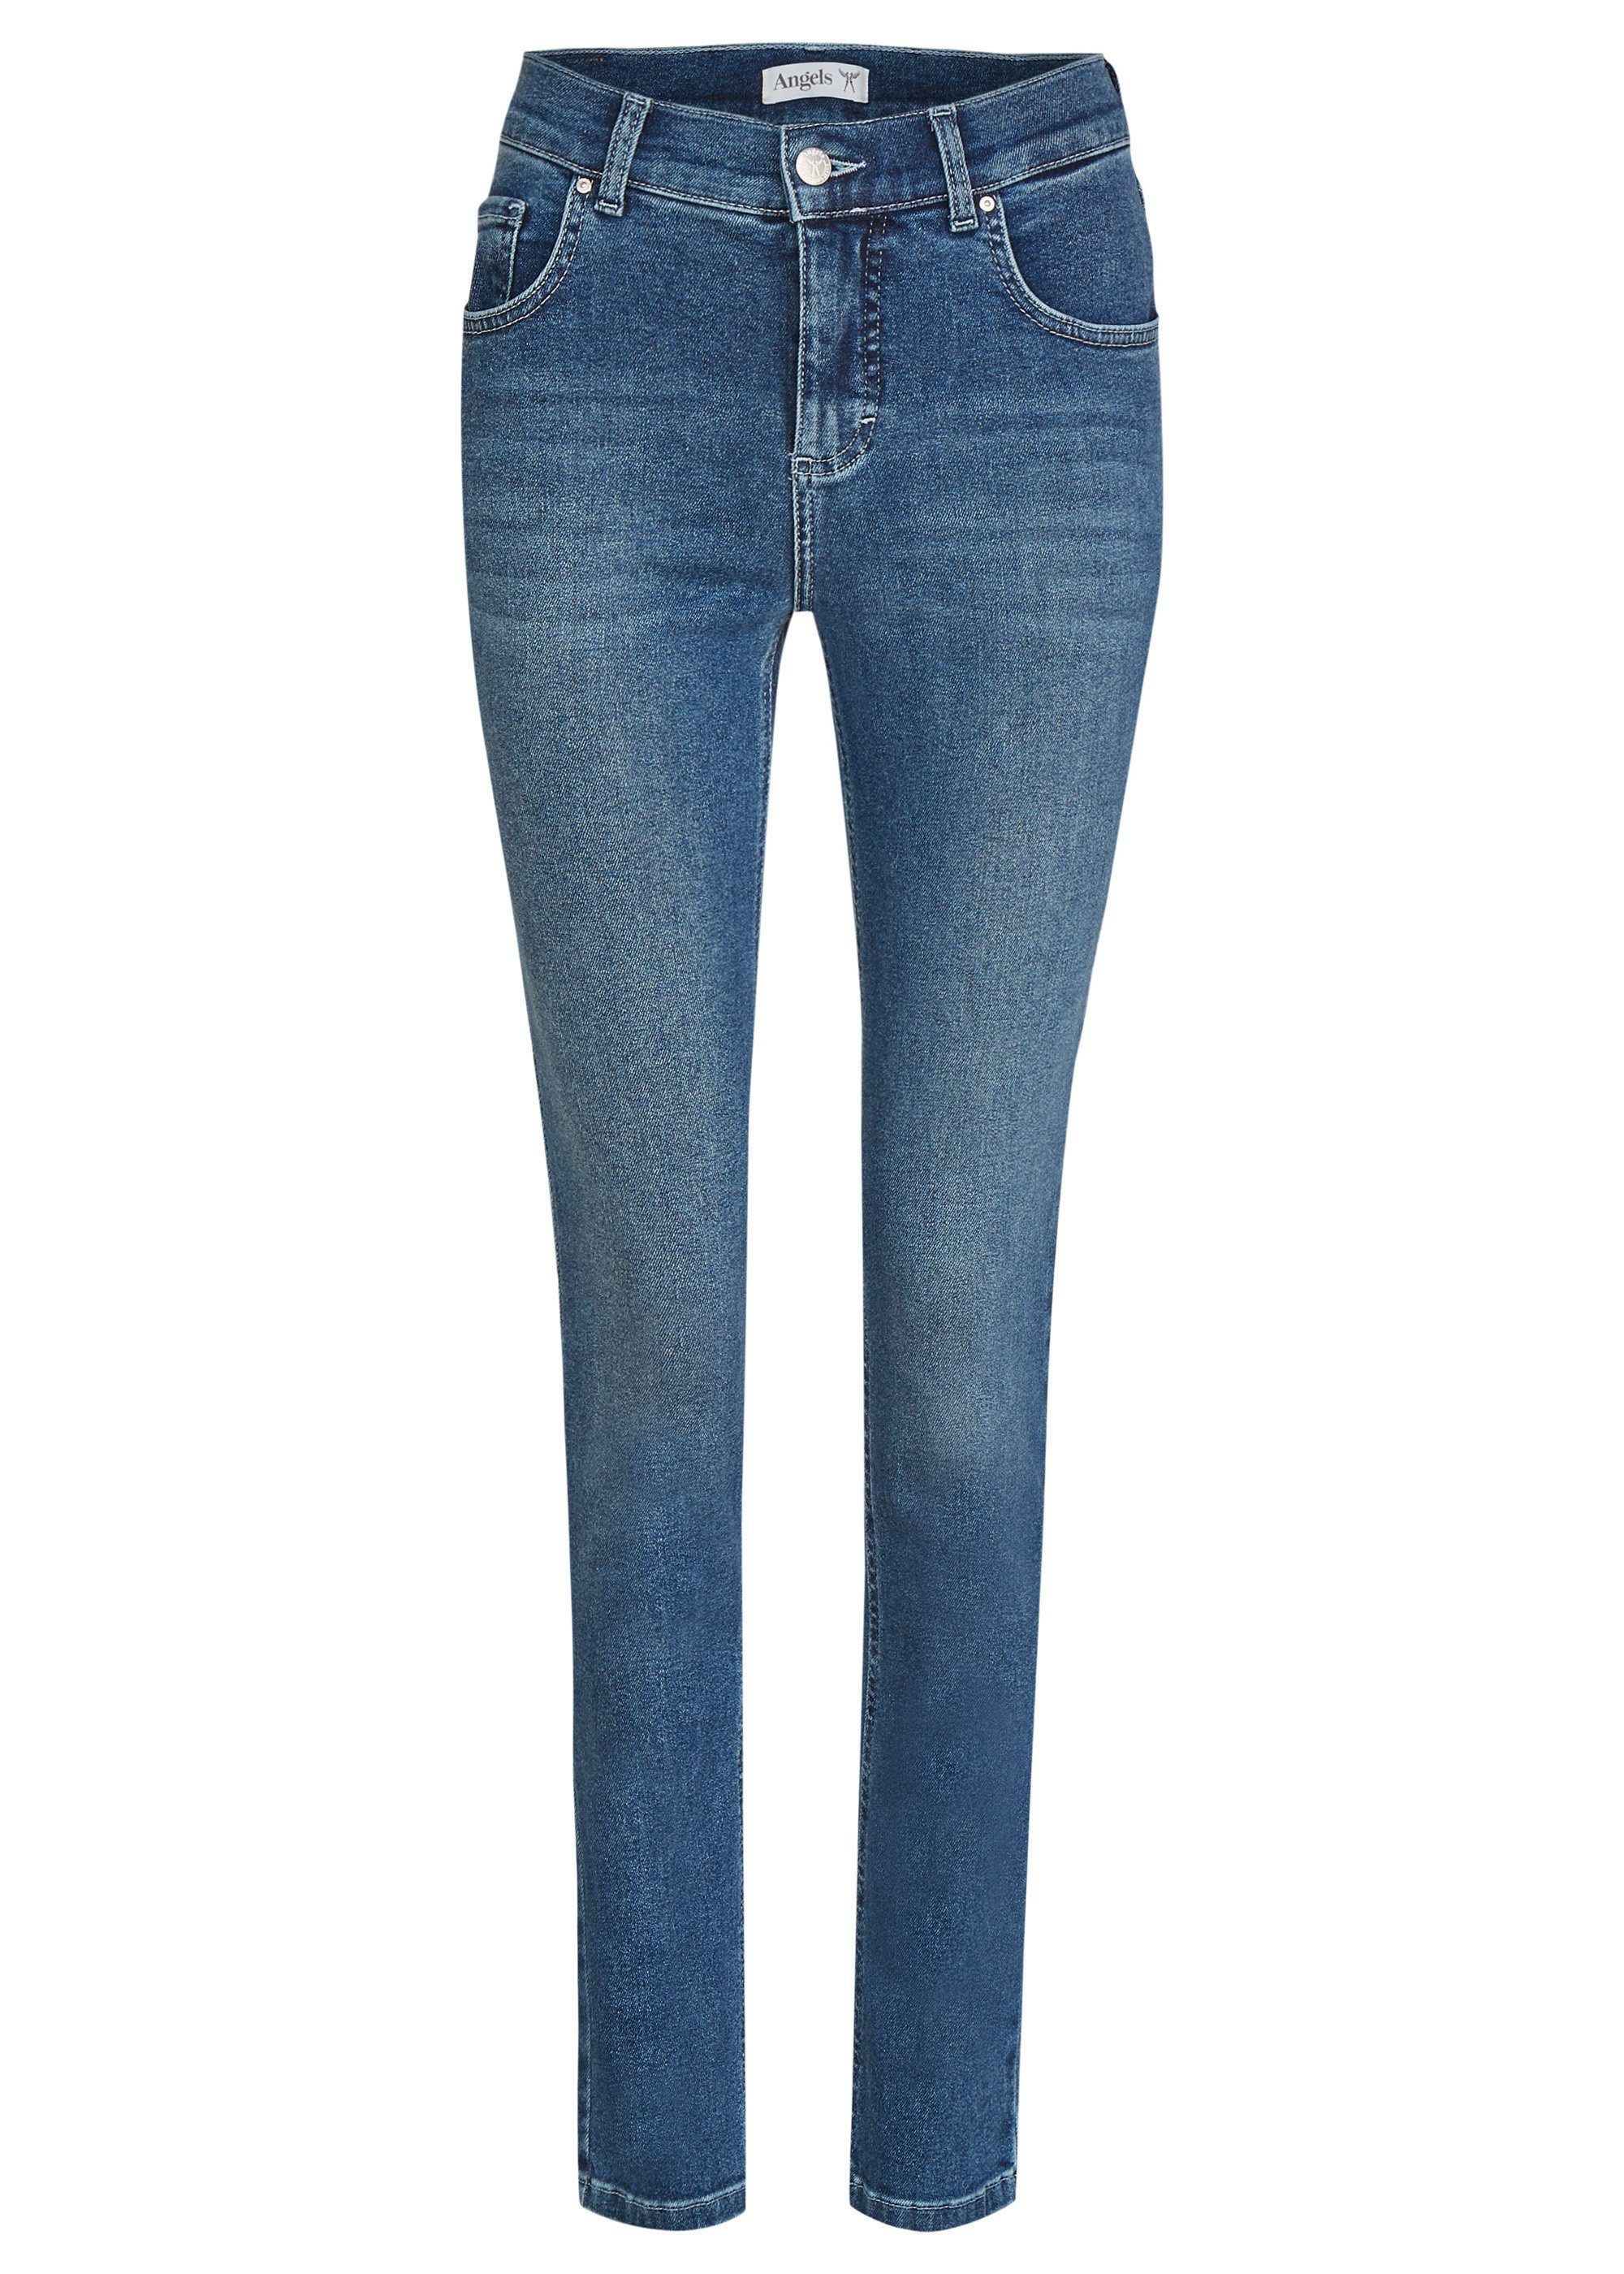 ANGELS Stretch-Jeans strong 325 12.3358 SKINNY ANGELS used - JEANS blue STRETCH mid